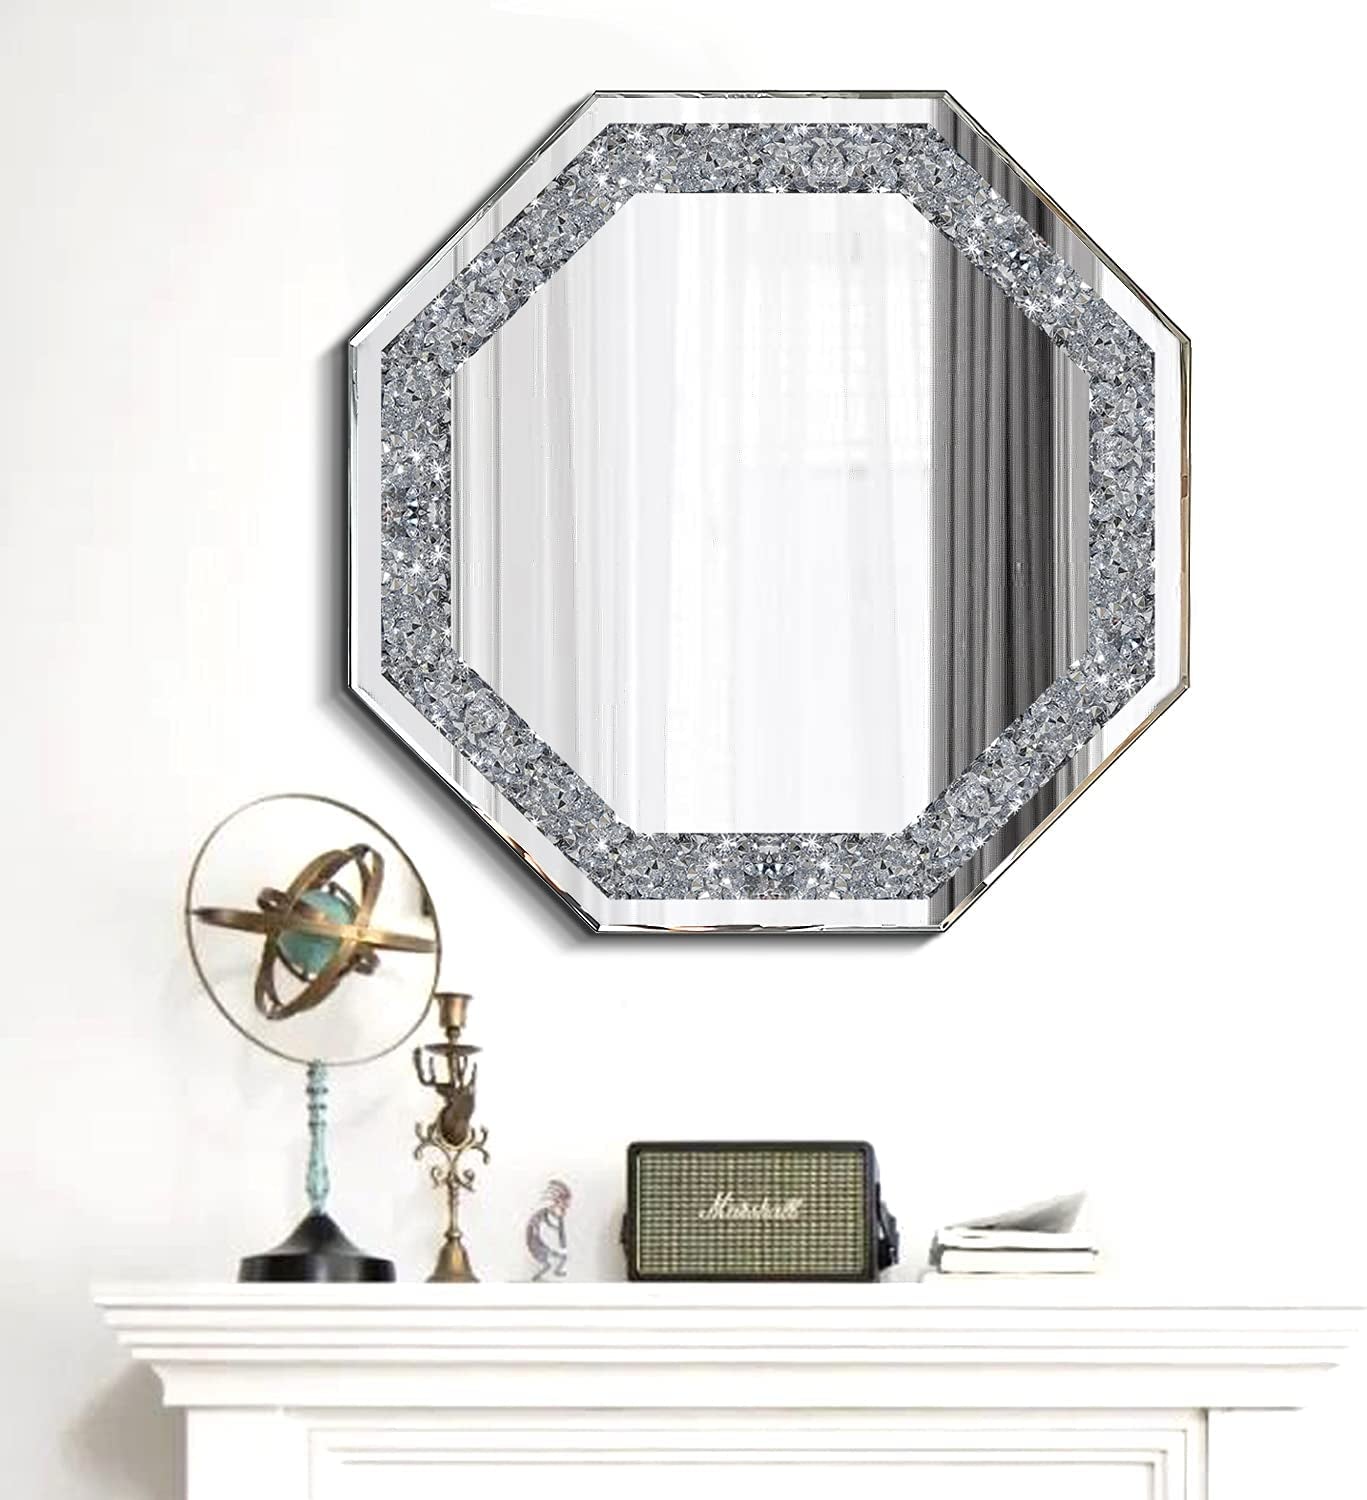 Wall Mirror.Crushed Diamond Glass Mirror. Refined Special-Shaped Decorative Mirror for Bathroom,Living Room,Bedroom.(20"X20")